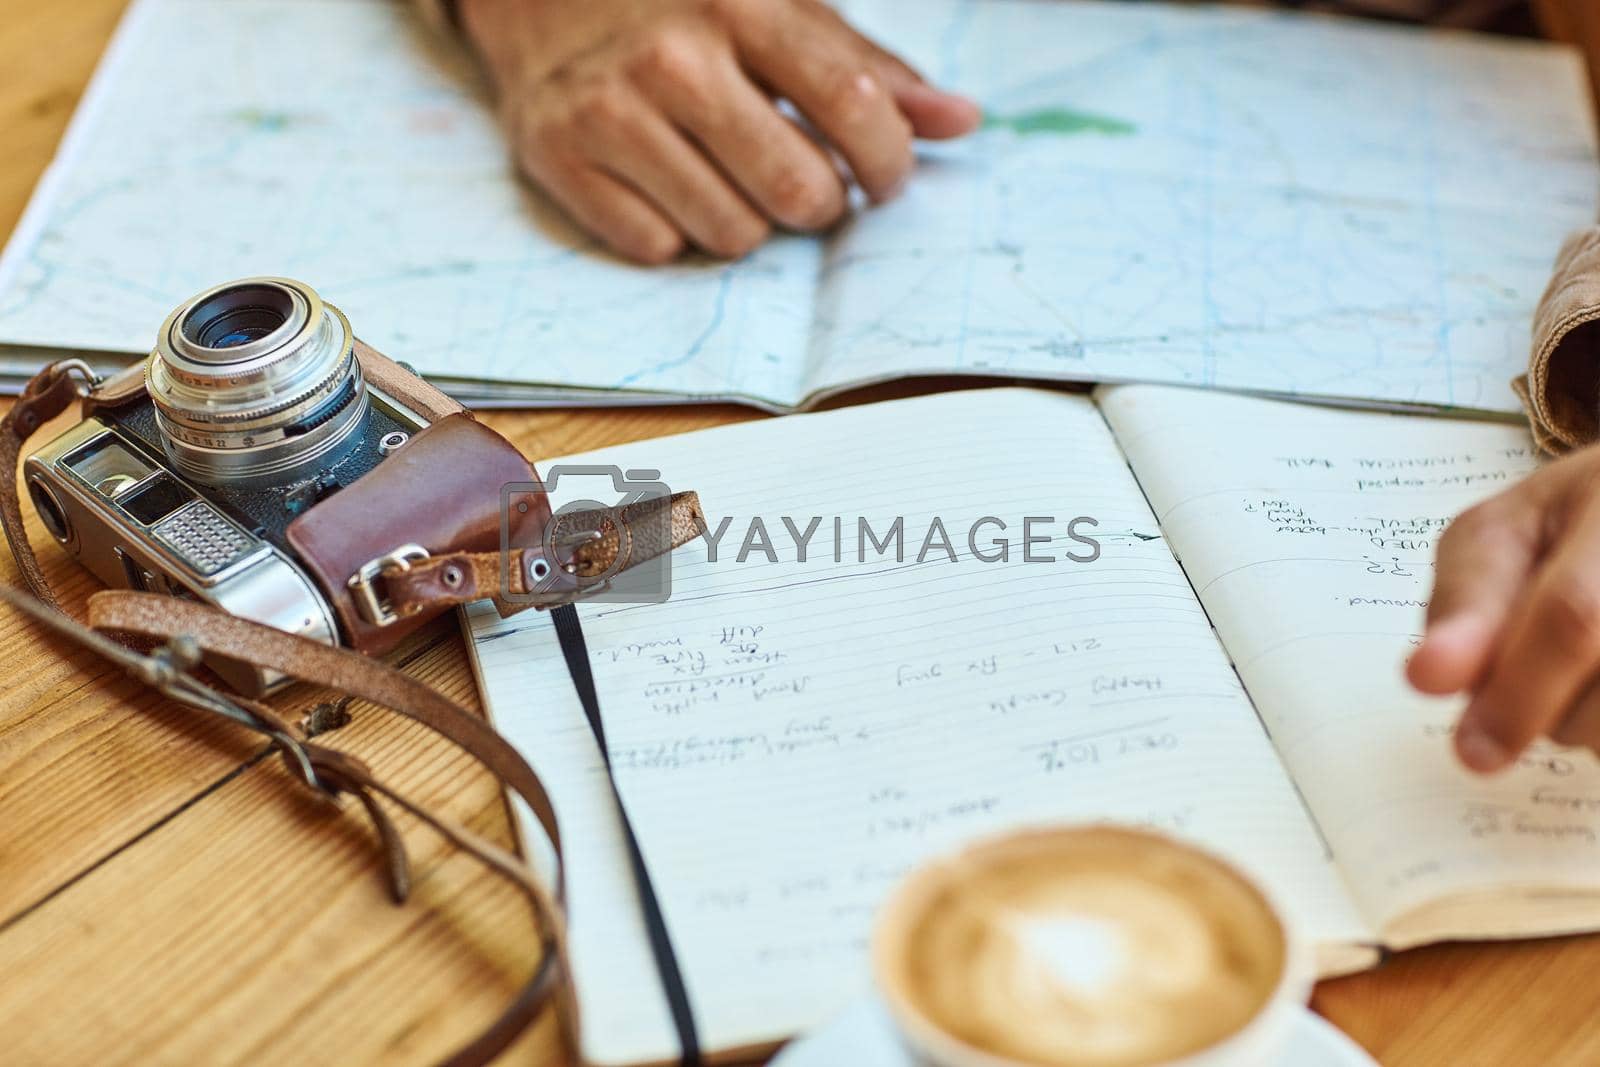 Shot of an unidentifiable tourist looking at maps and travel journals while enjoying coffee at a cafe.